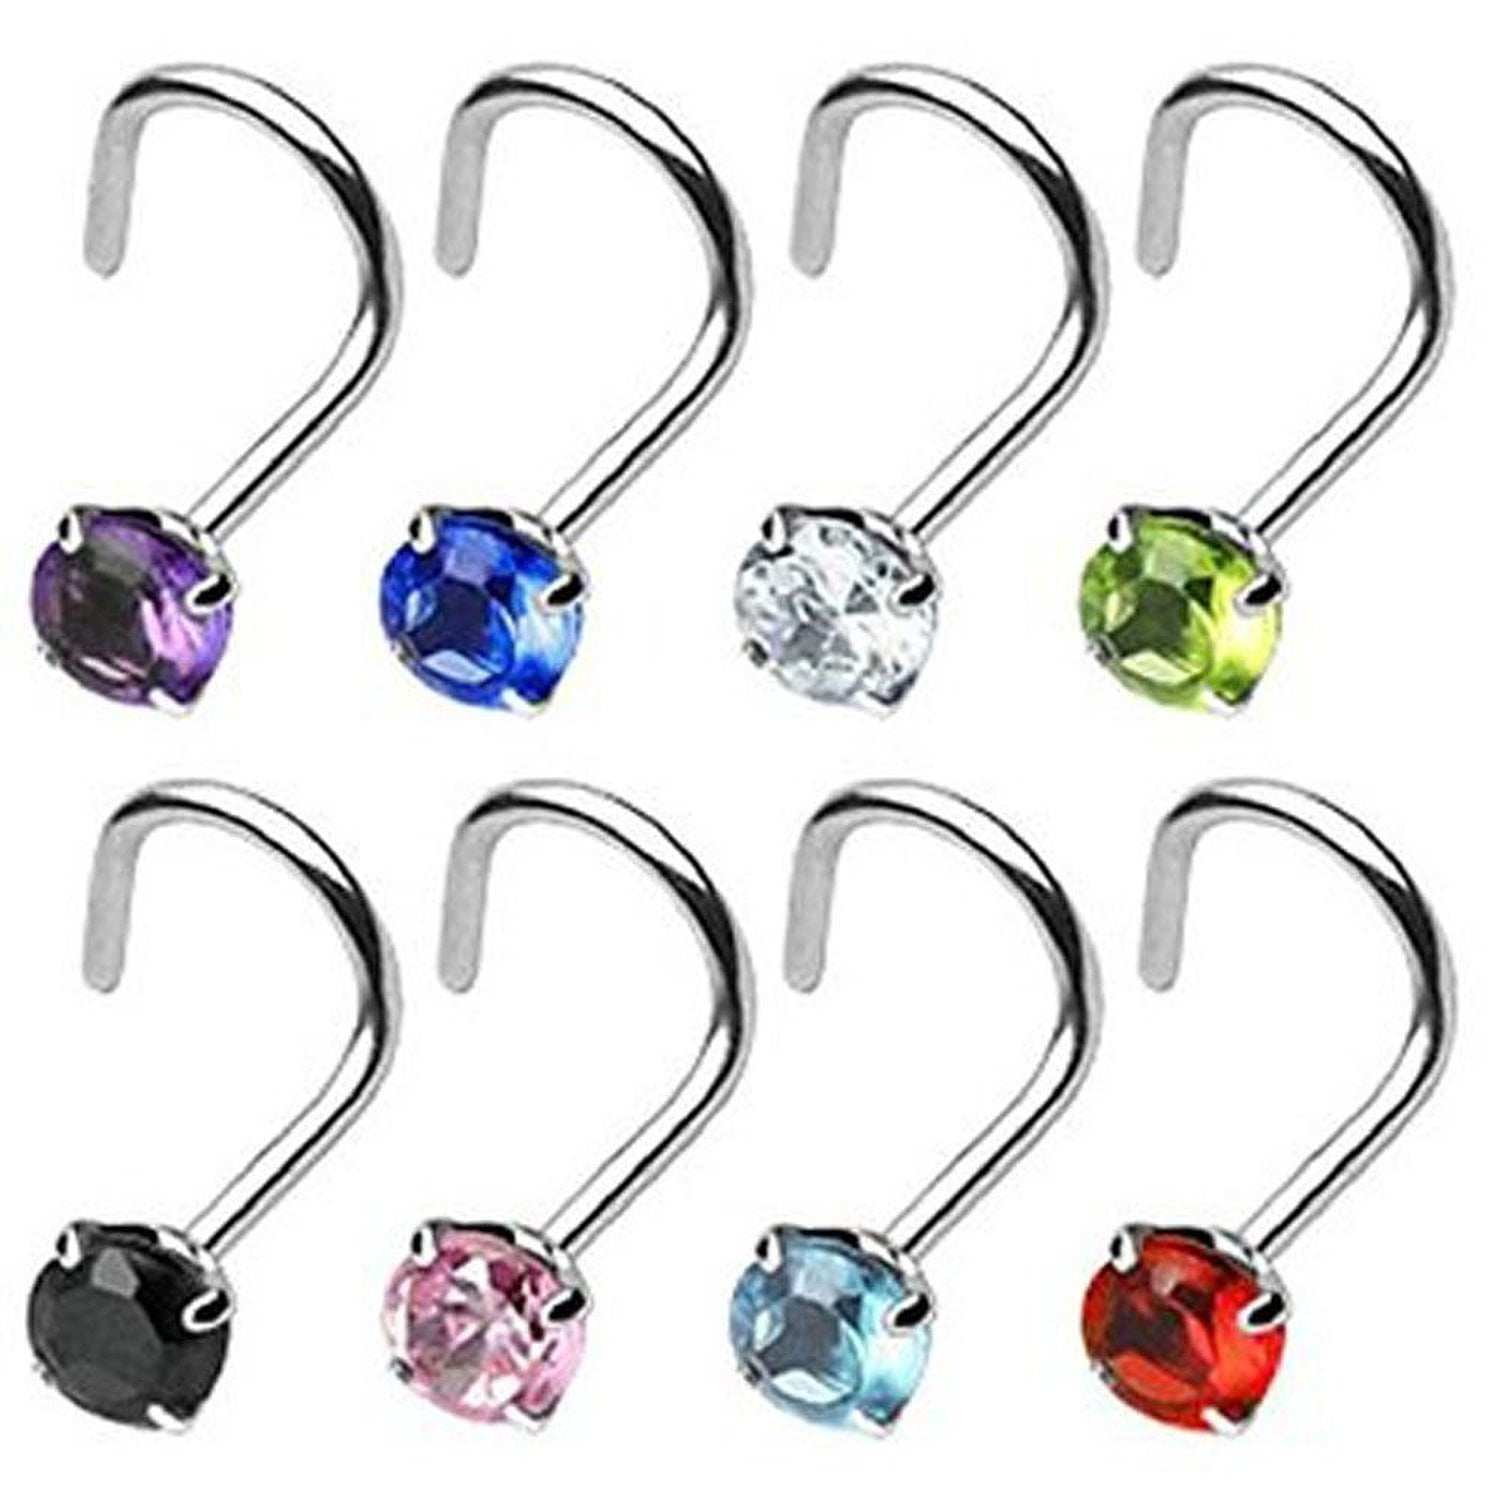 20G Round CZ Prong Set 316L Surgical Steel Nose Screw Nose Ring Stud 